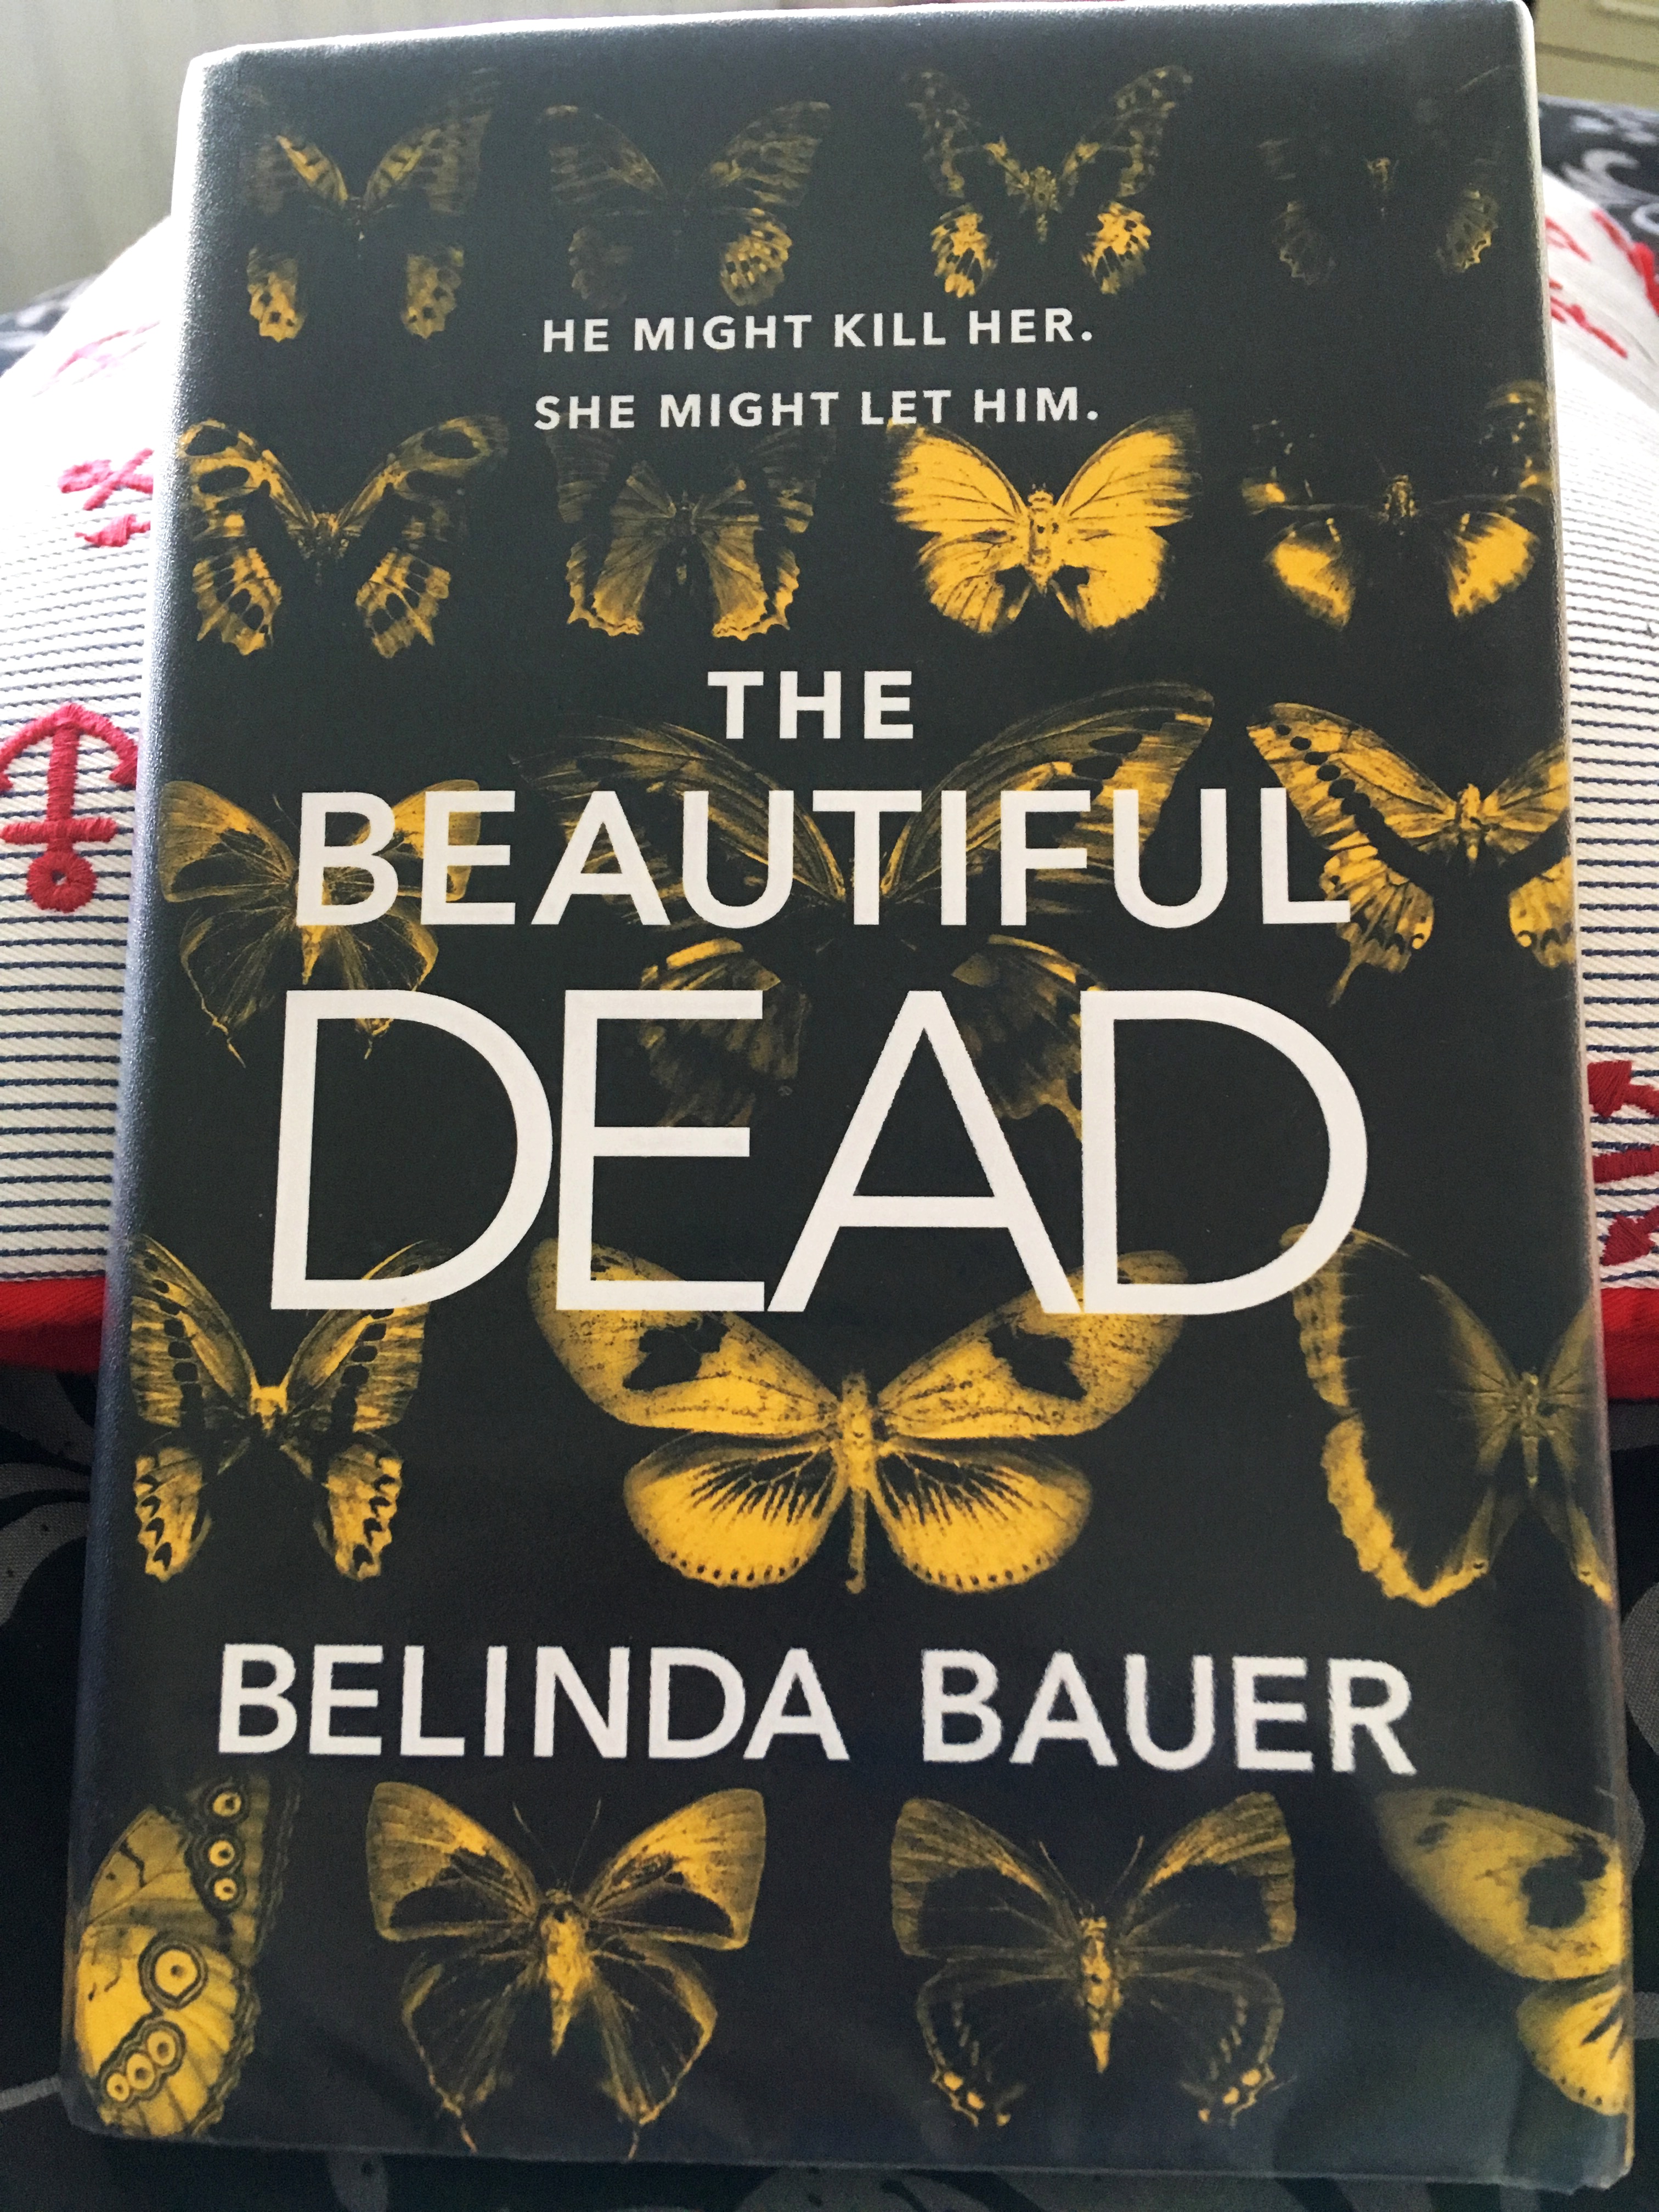 The Beautiful Dead book cover.